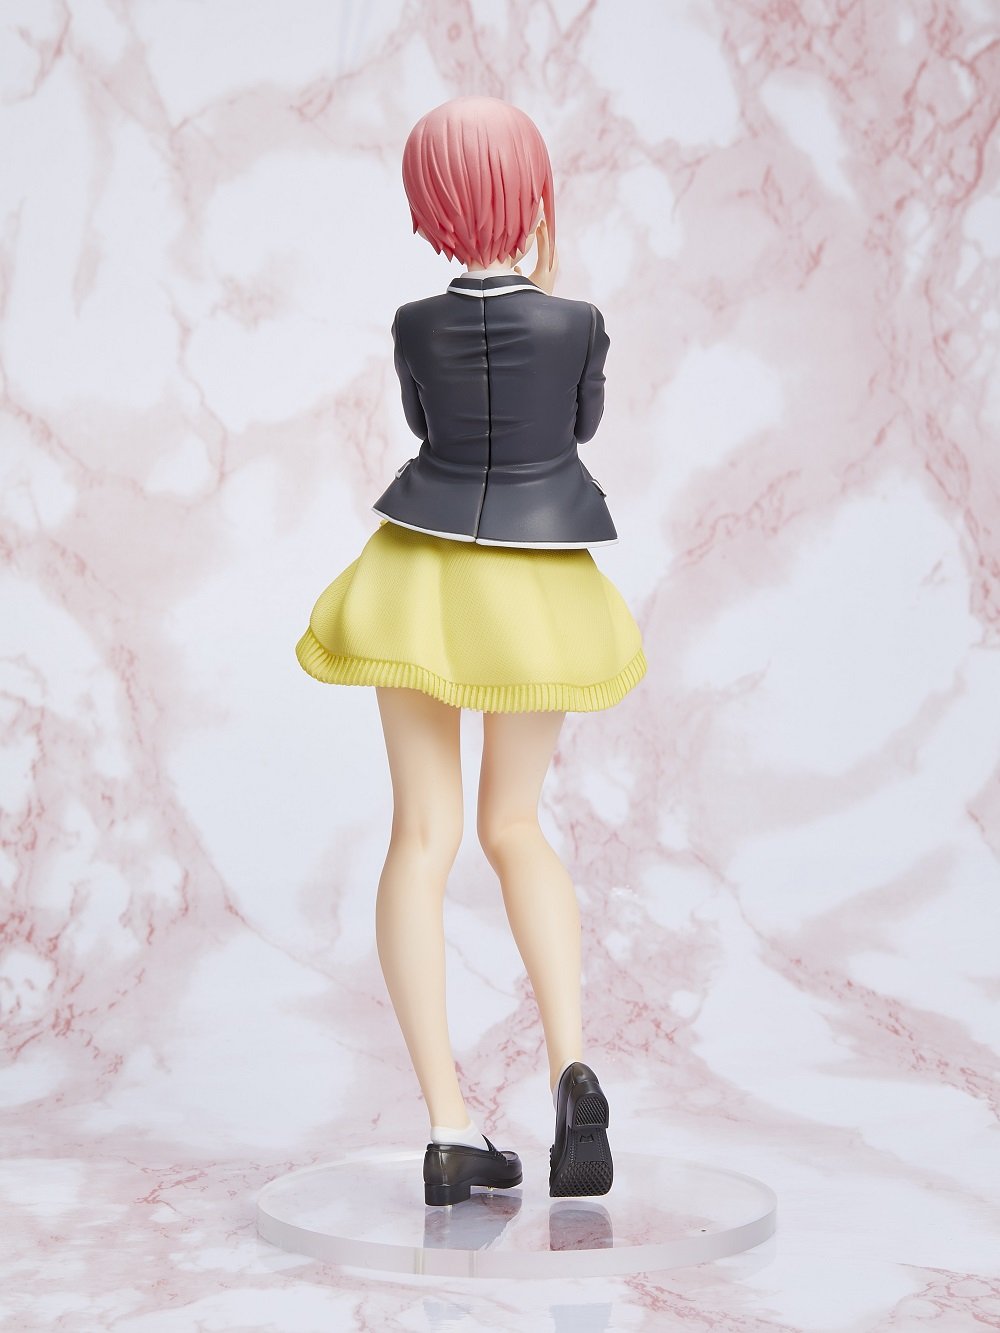 The Quintessential Quintuplets - Ichika Nakano Prize Figure (Uniform Ver.) image count 4